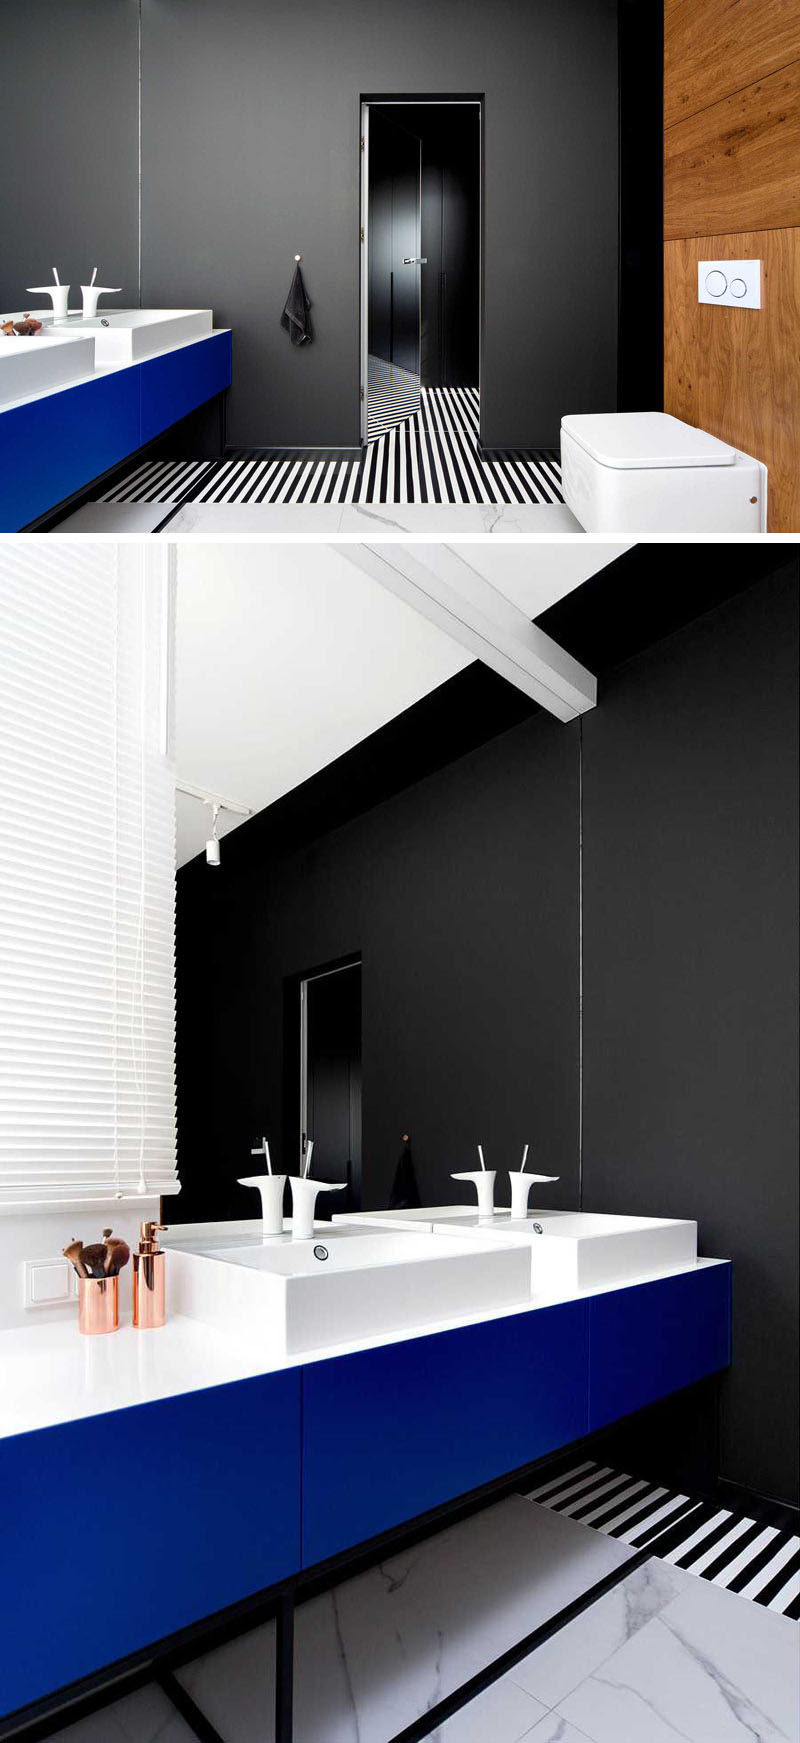 This modern master bathroom features black and white striped flooring, a black wall, and a bright blue vanity. #ModernBathroom #BathroomDesign